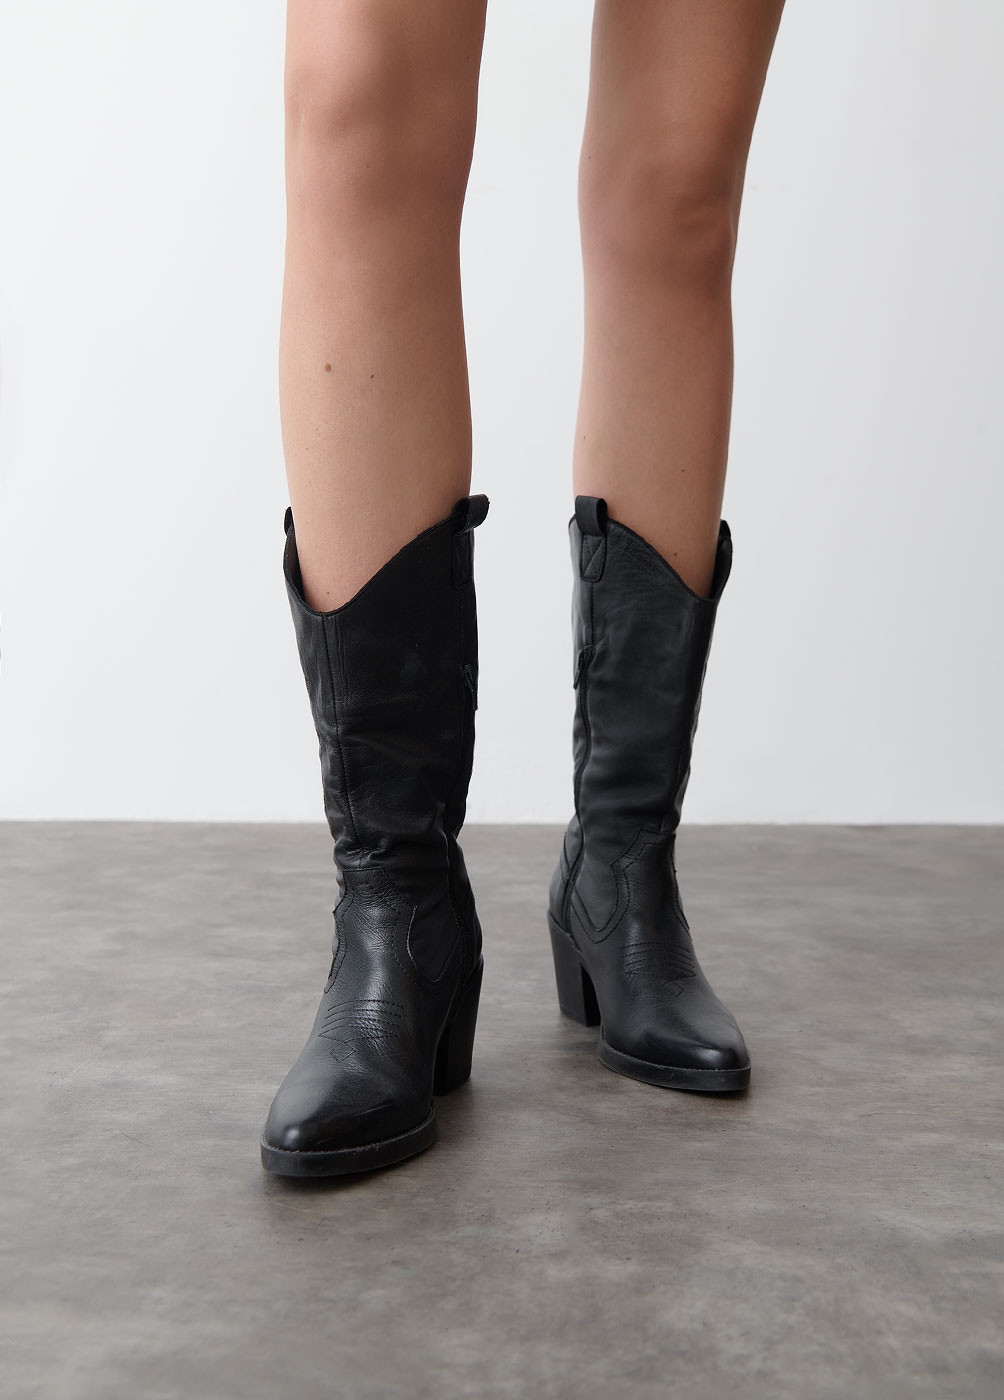 WESTERN-STYLE BOOTS WITH STITCH DETAIL